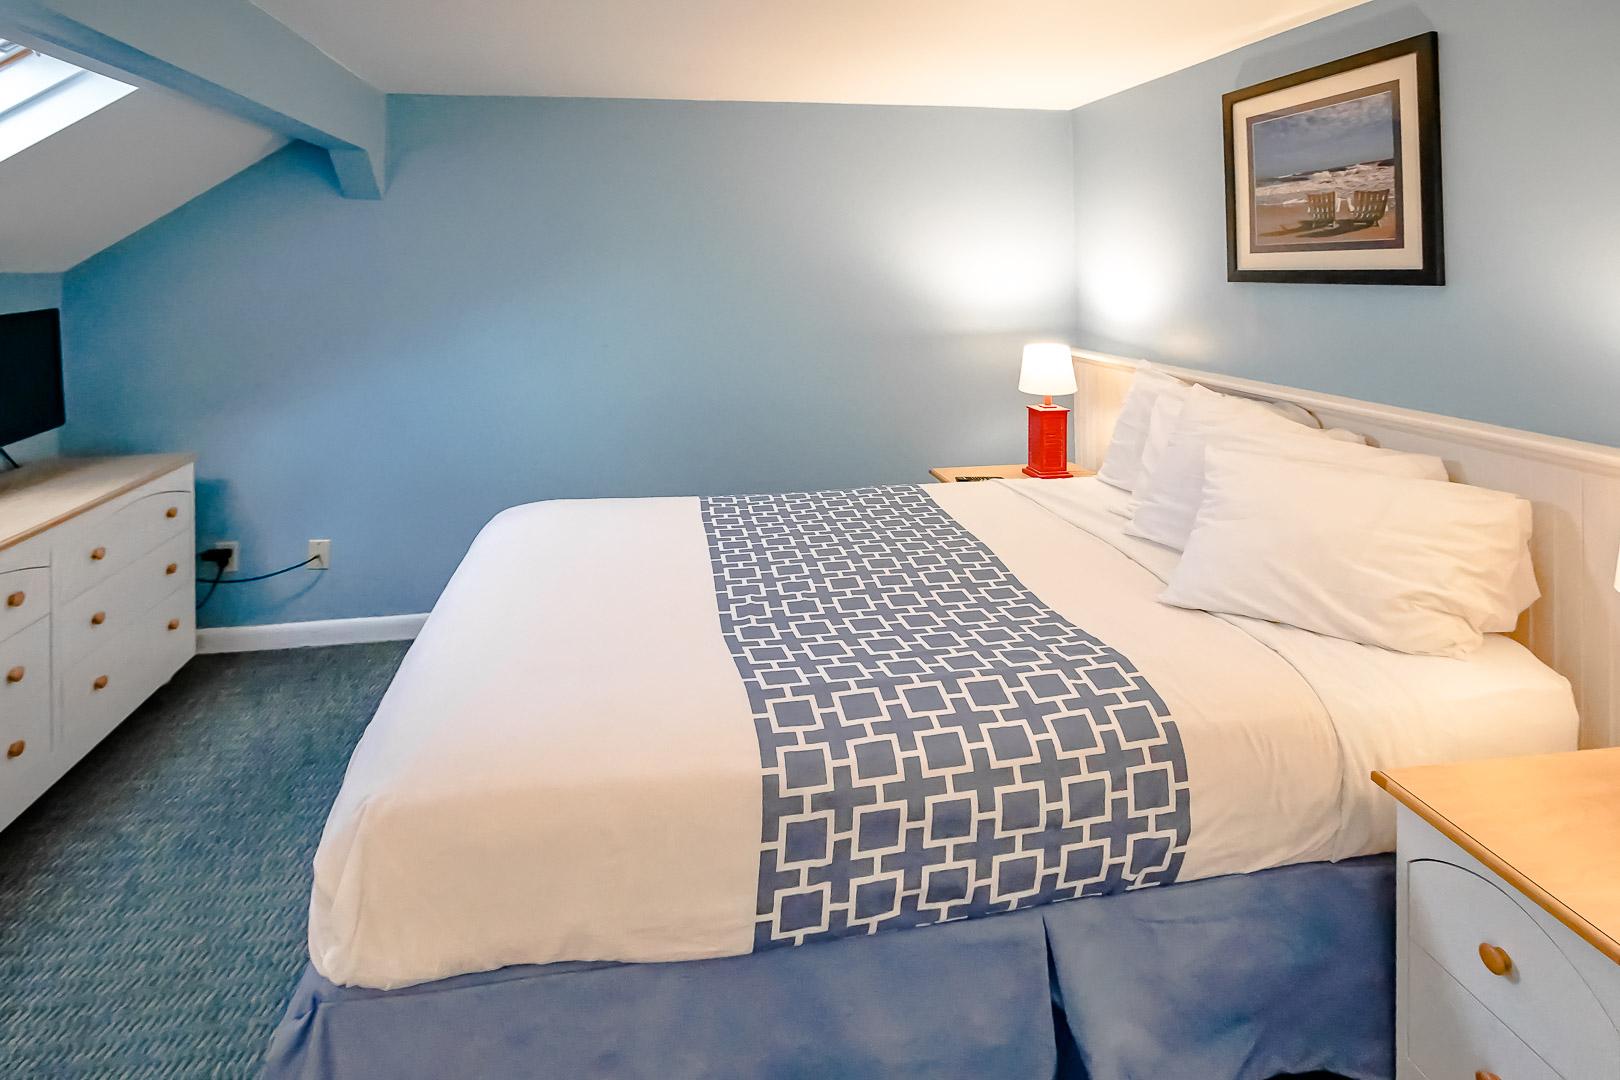 A master bedroom with a king size bed at VRI's Seawinds II Resort in Massachusetts.